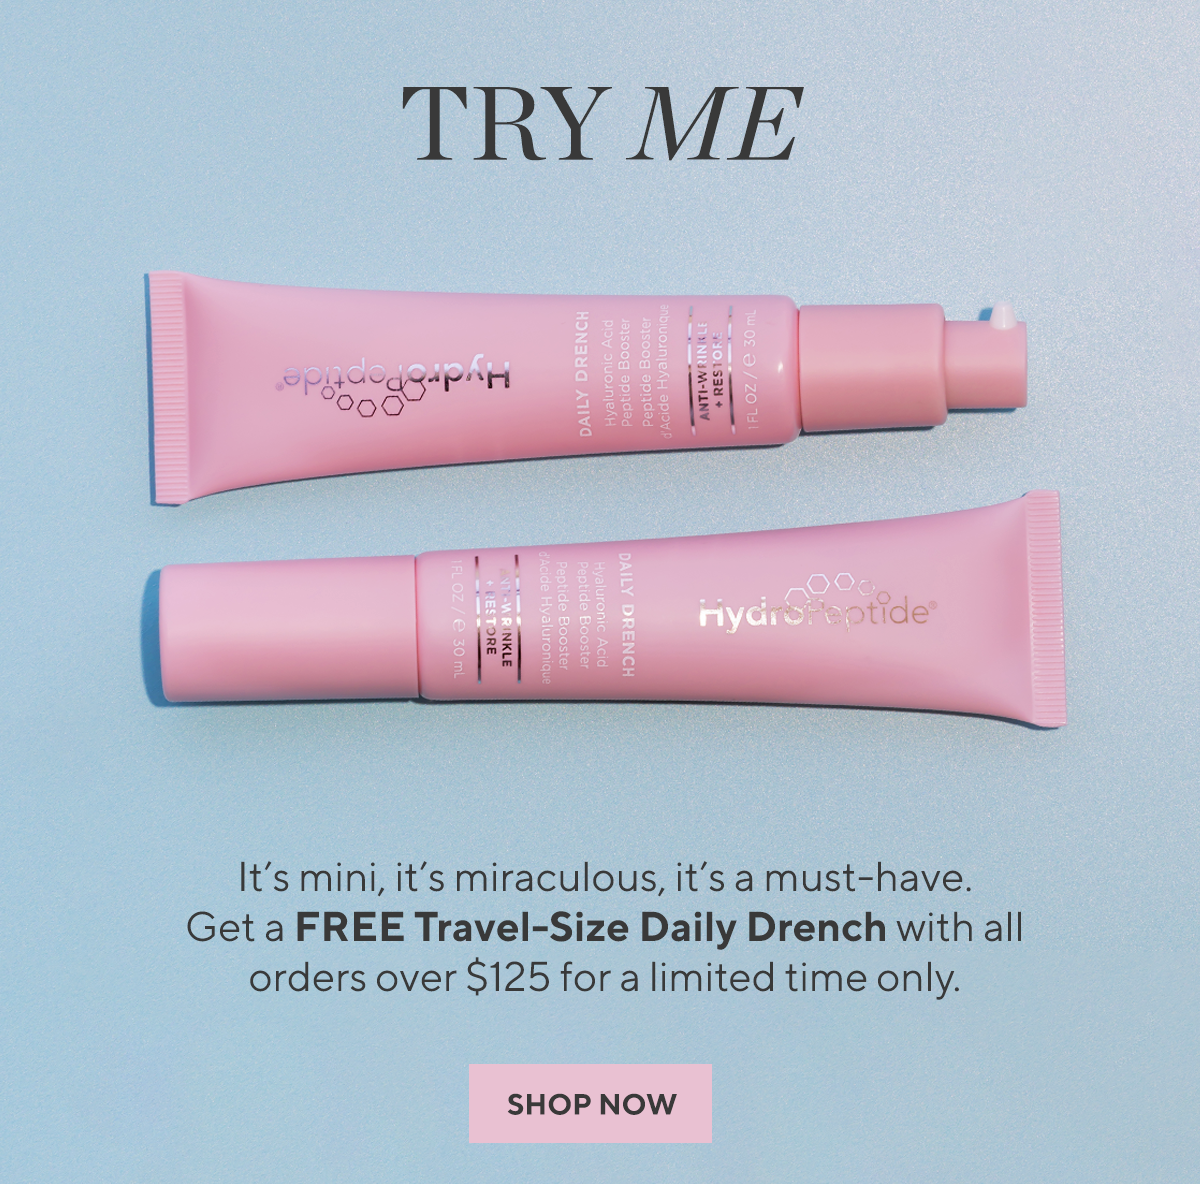 Try me! FREE travel Daily Drench with all orders over $125!